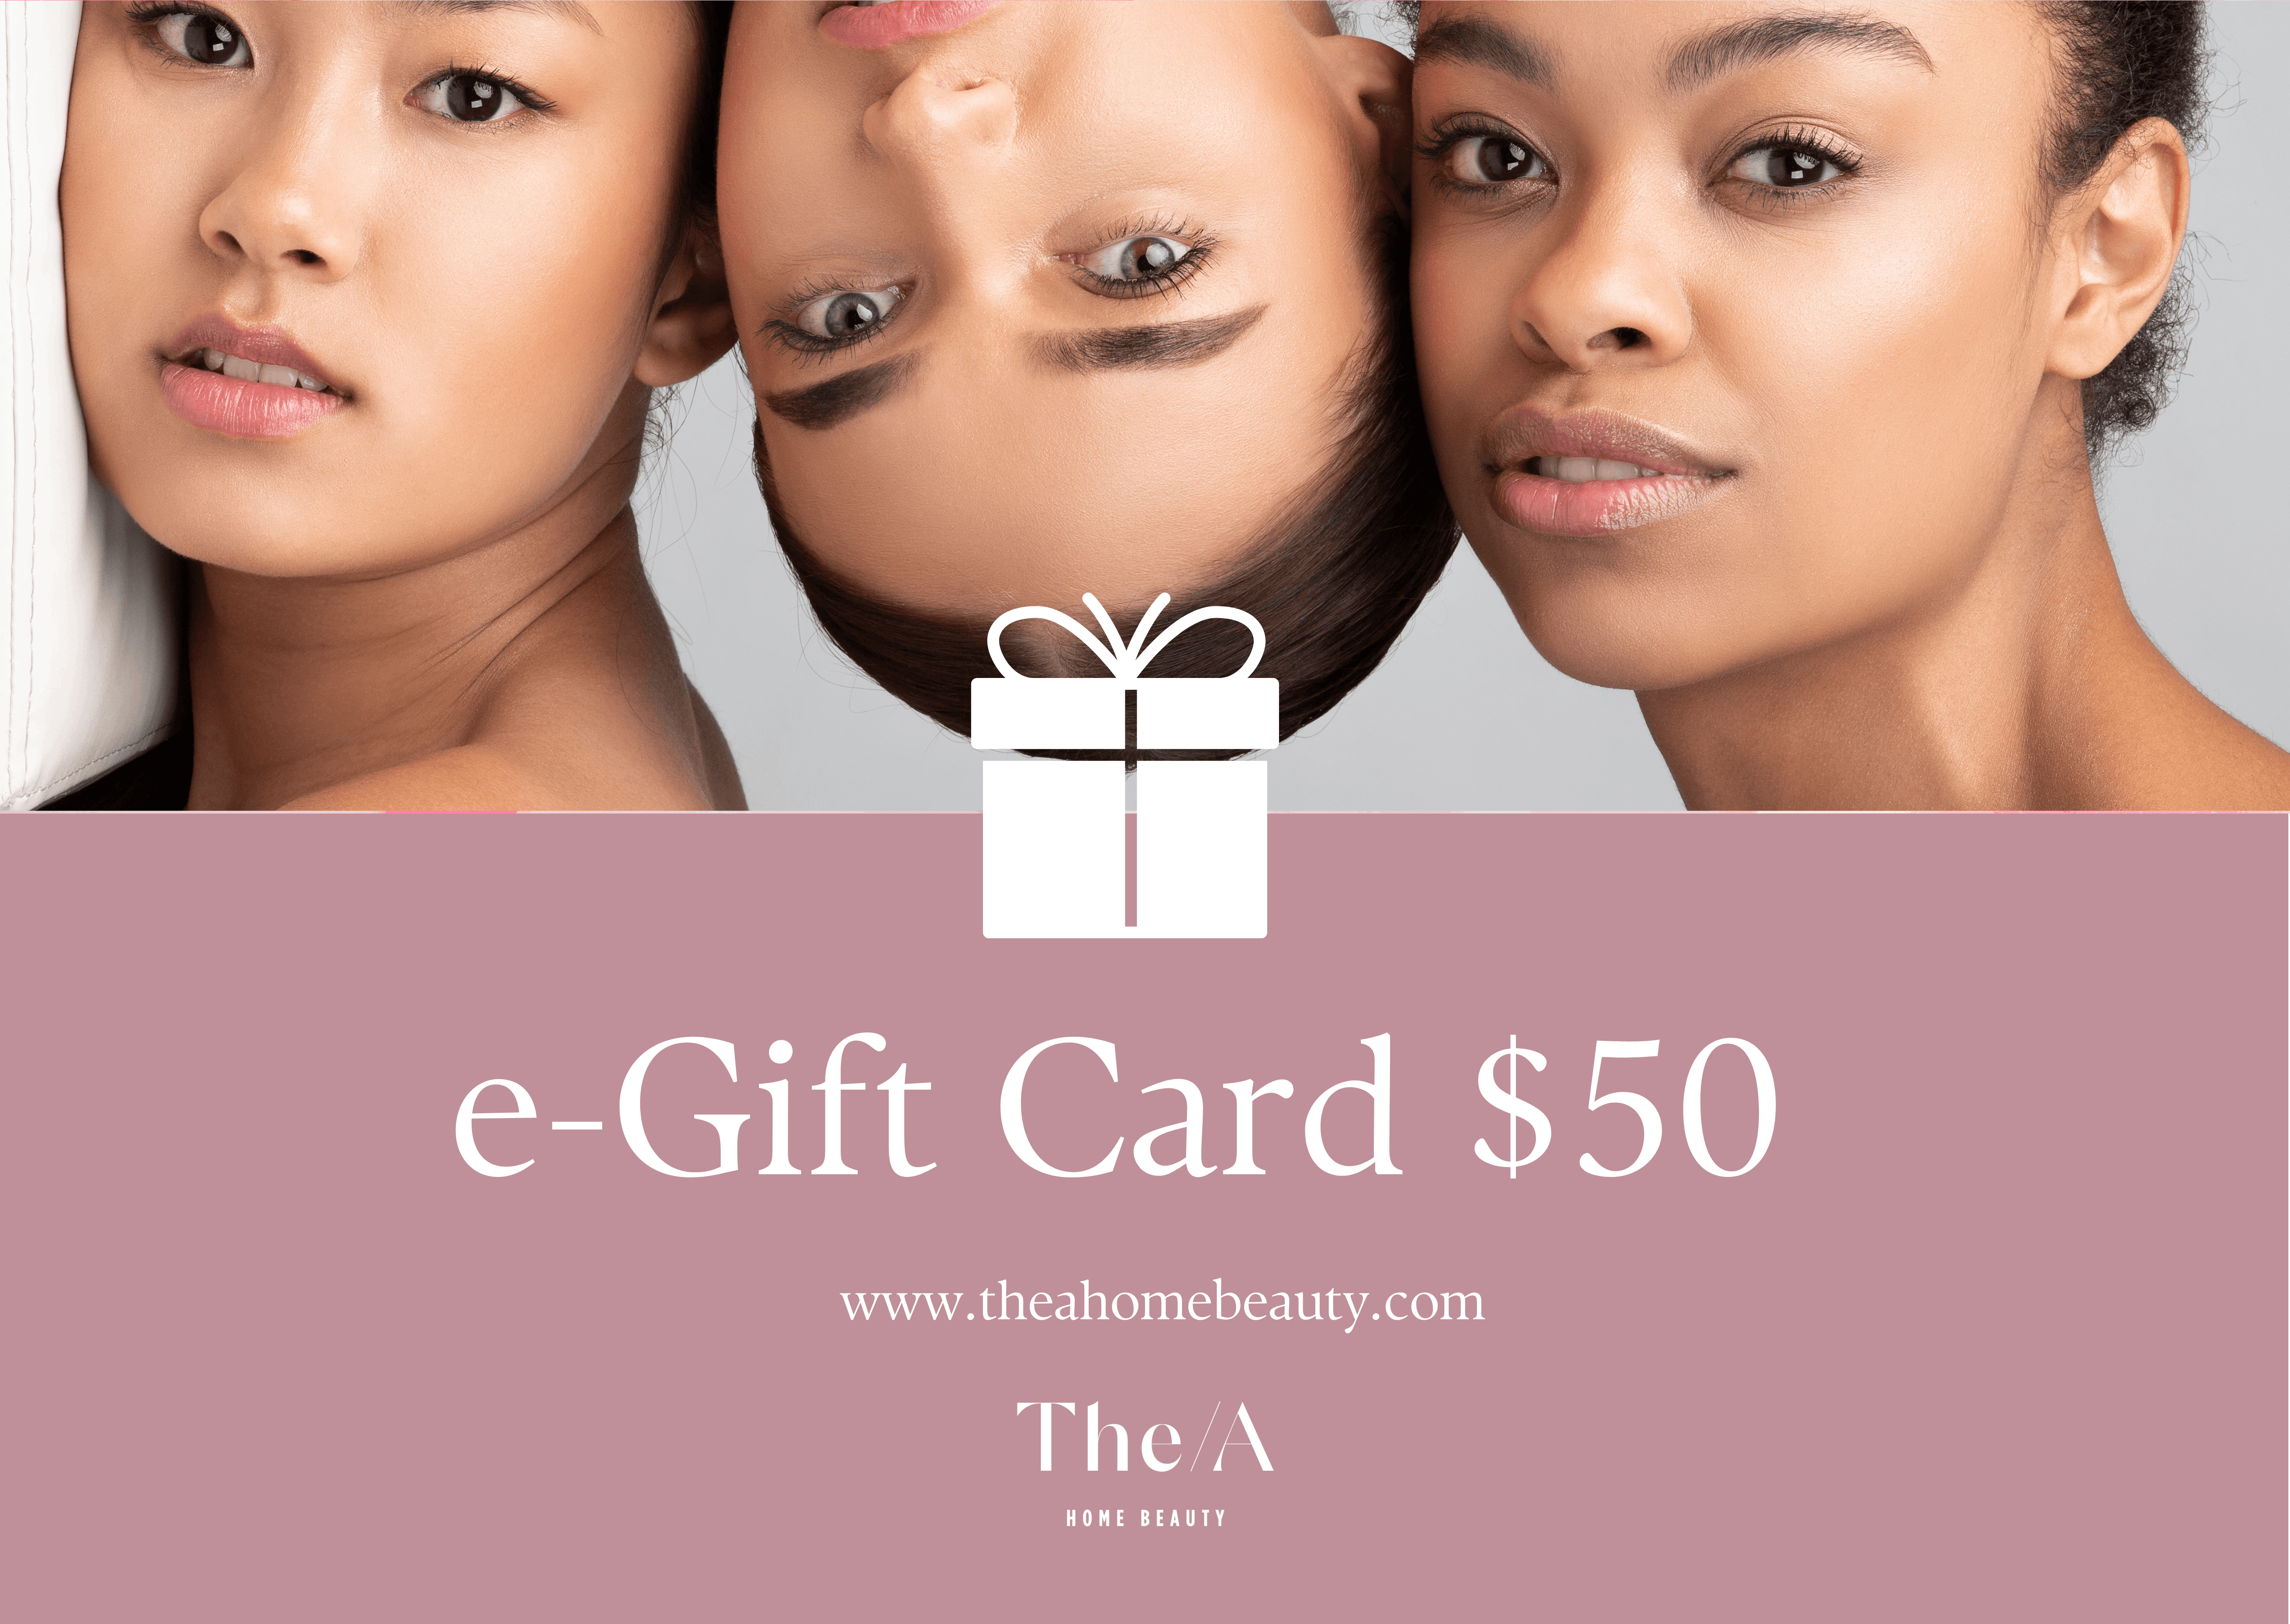 The/A Home Beauty Gift Card $1000.00 HKD 